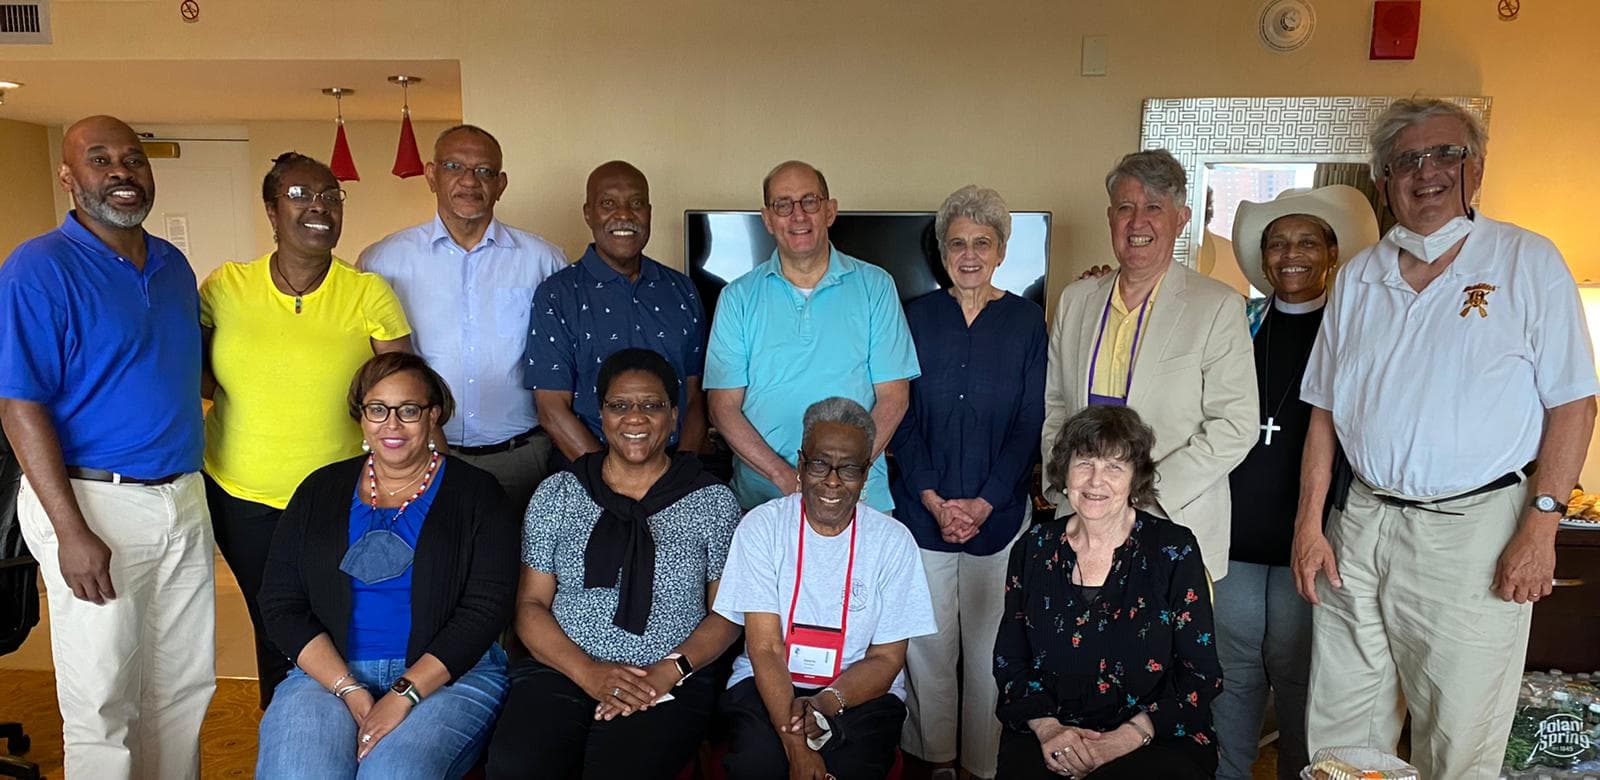 Deputies and Bishops of the Diocese of Long Island gather in the hospitality suite during the 80th General Convention. Front row: Sharon Brown-Veillard, Mo. Karen Davis-Lawson, Valerie Crosdale, Kathy Page. Back row: Fr. Hickman Alexandre, Linda Watson-Lorde, Fr. Donovan Leys, Fr. Tony Hinds, Bp. Larry Provenzano, Bp. Gerry Wolf, Bp. Bill Franklin, Cn. Lynn Collins, Charlie Janoff.